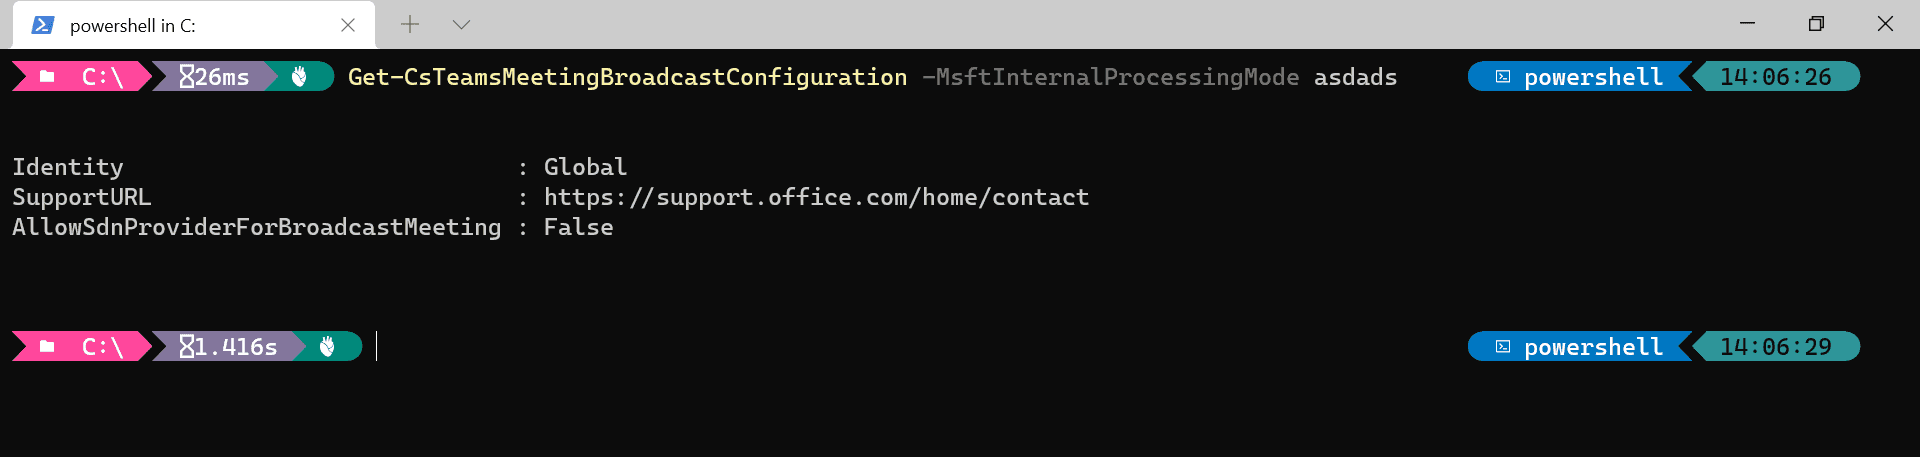 MsftInternalProcessingMode parameter being ignored by PowerShell